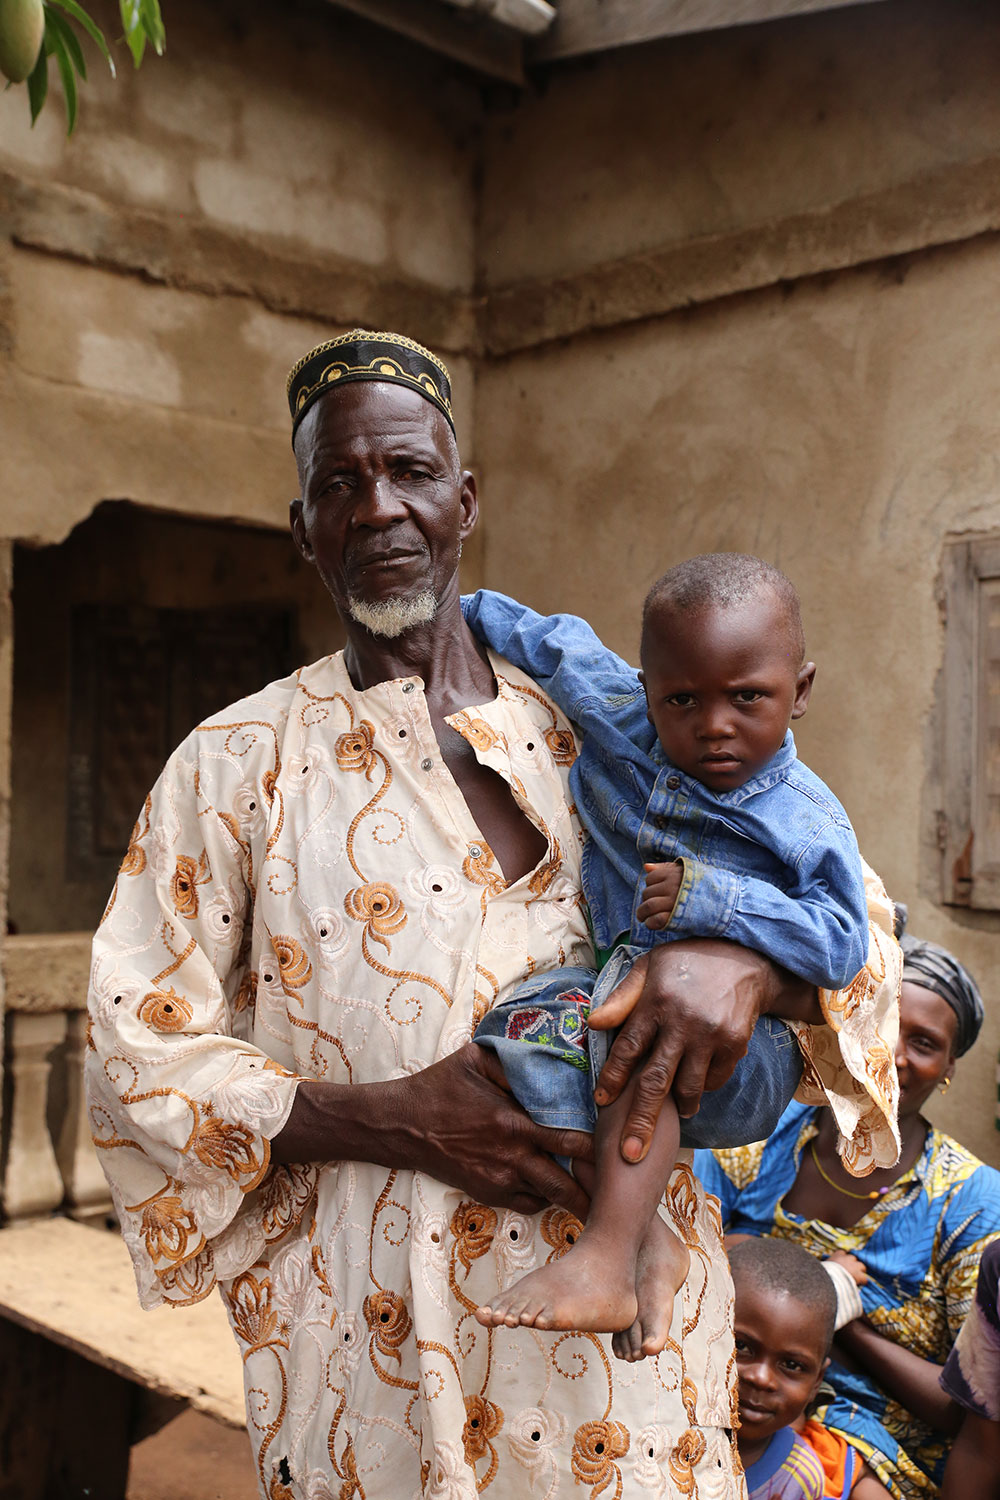 A grandfather poses with his grandchild. Grandfathers are key influencers of household behaviors. SPRING is committed to engaging grandfathers and other key influencers like mothers-in-law and community leaders in community video dissemination events.